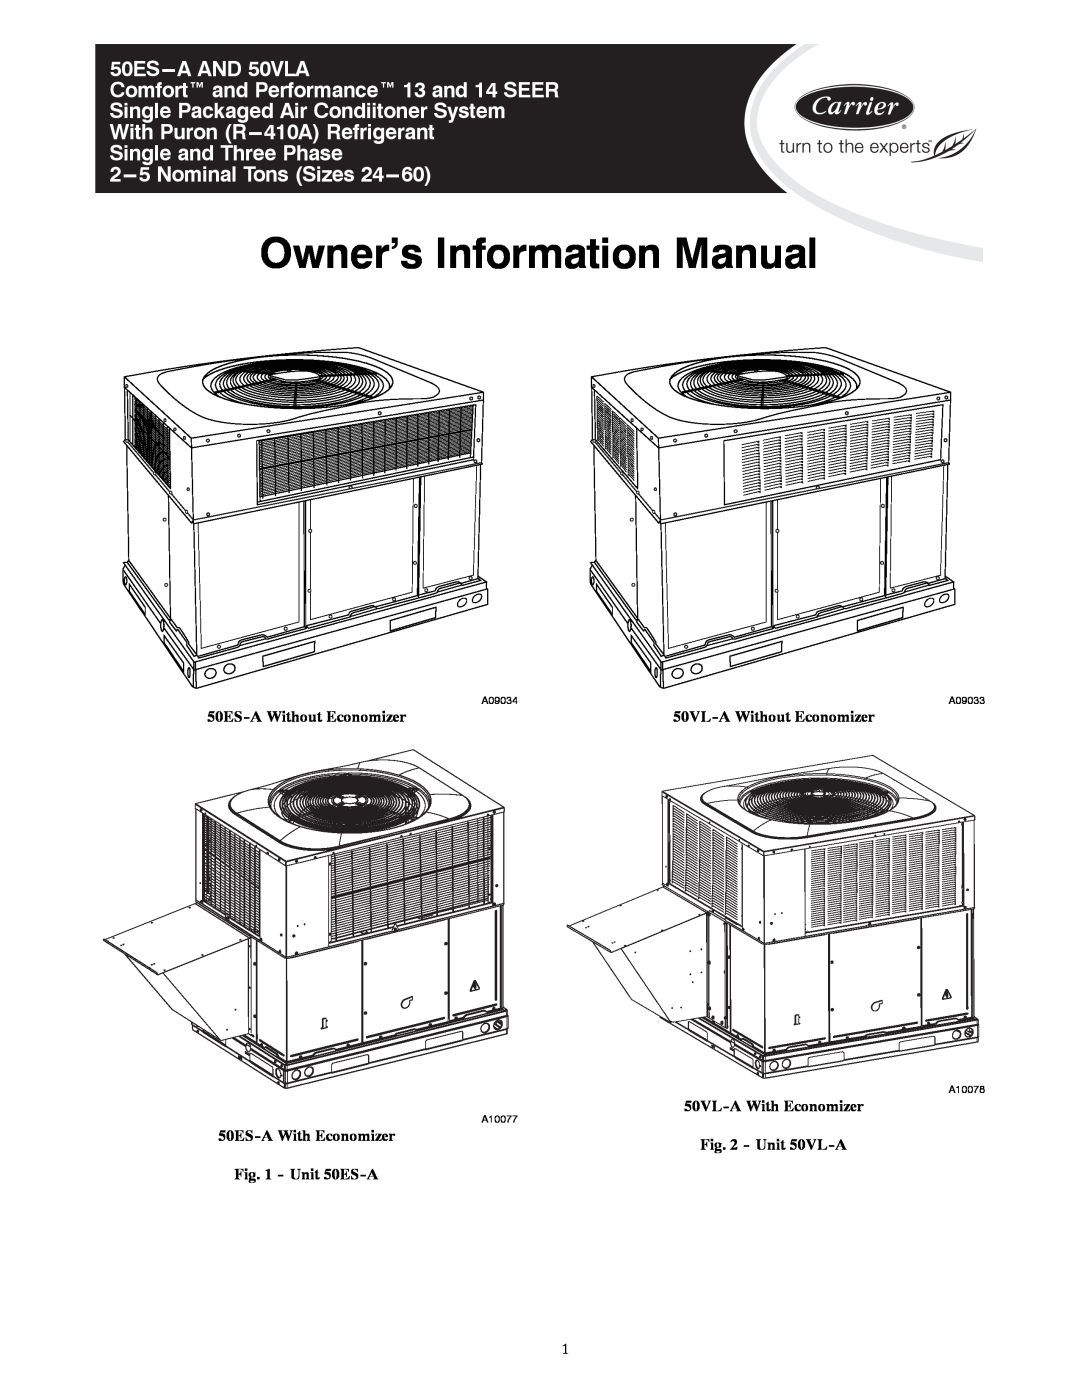 Carrier manual Owner’s Information Manual, 50ES---AAND 50VLA, Comfort and Performance 13 and 14 SEER, Unit 50VL-A 